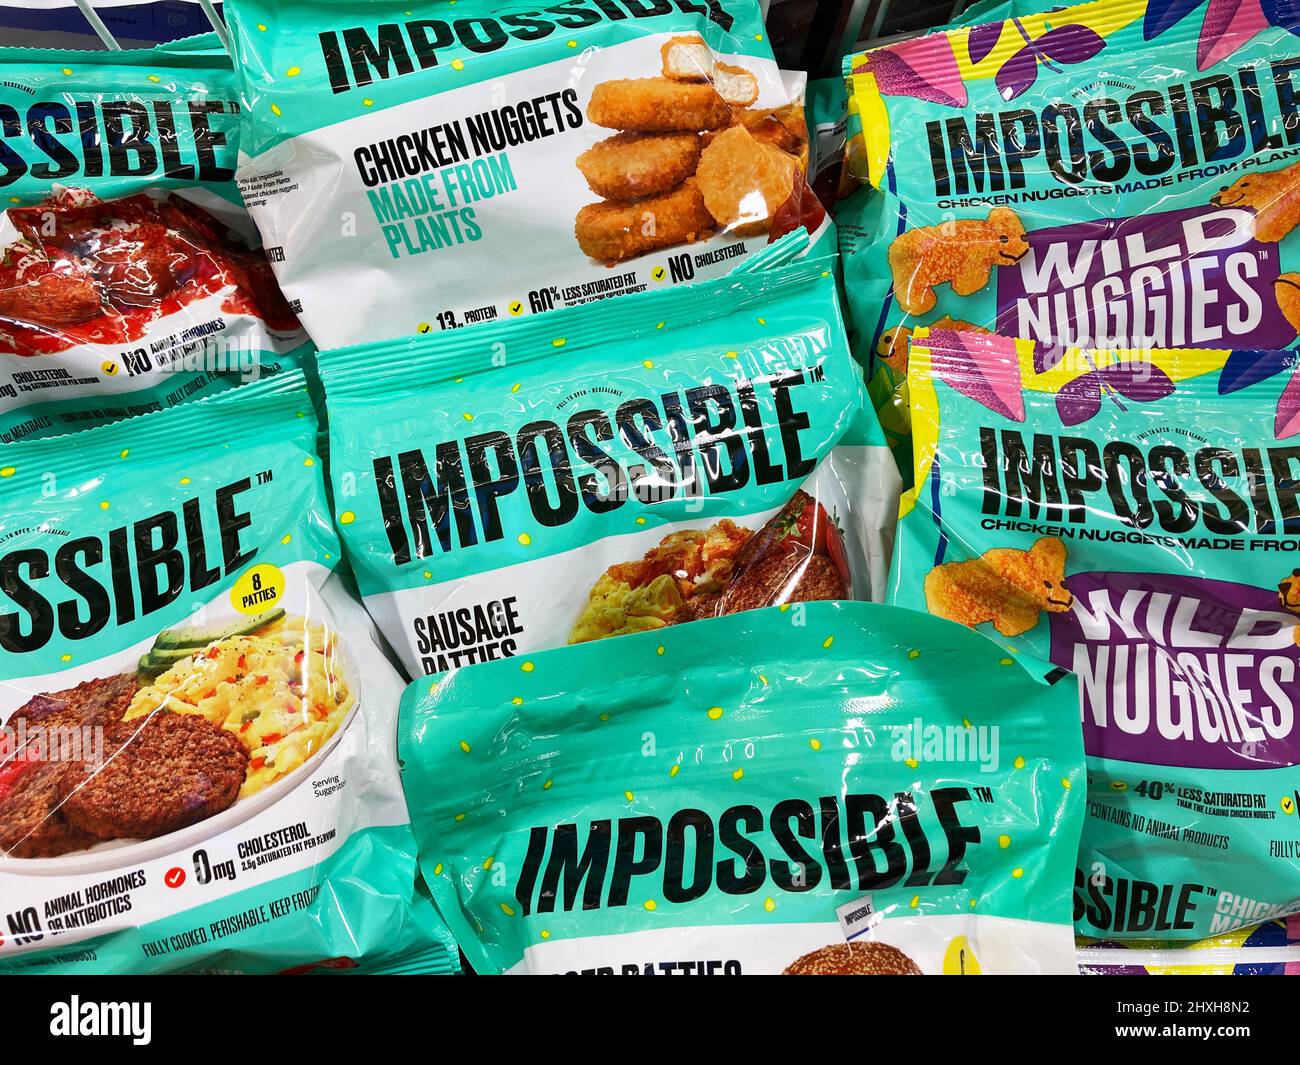 Impossible Foods chicken nuggets available for vegan customers on shelves of alternative meat section of grocery store. - San Jose, California, USA - Stock Photo